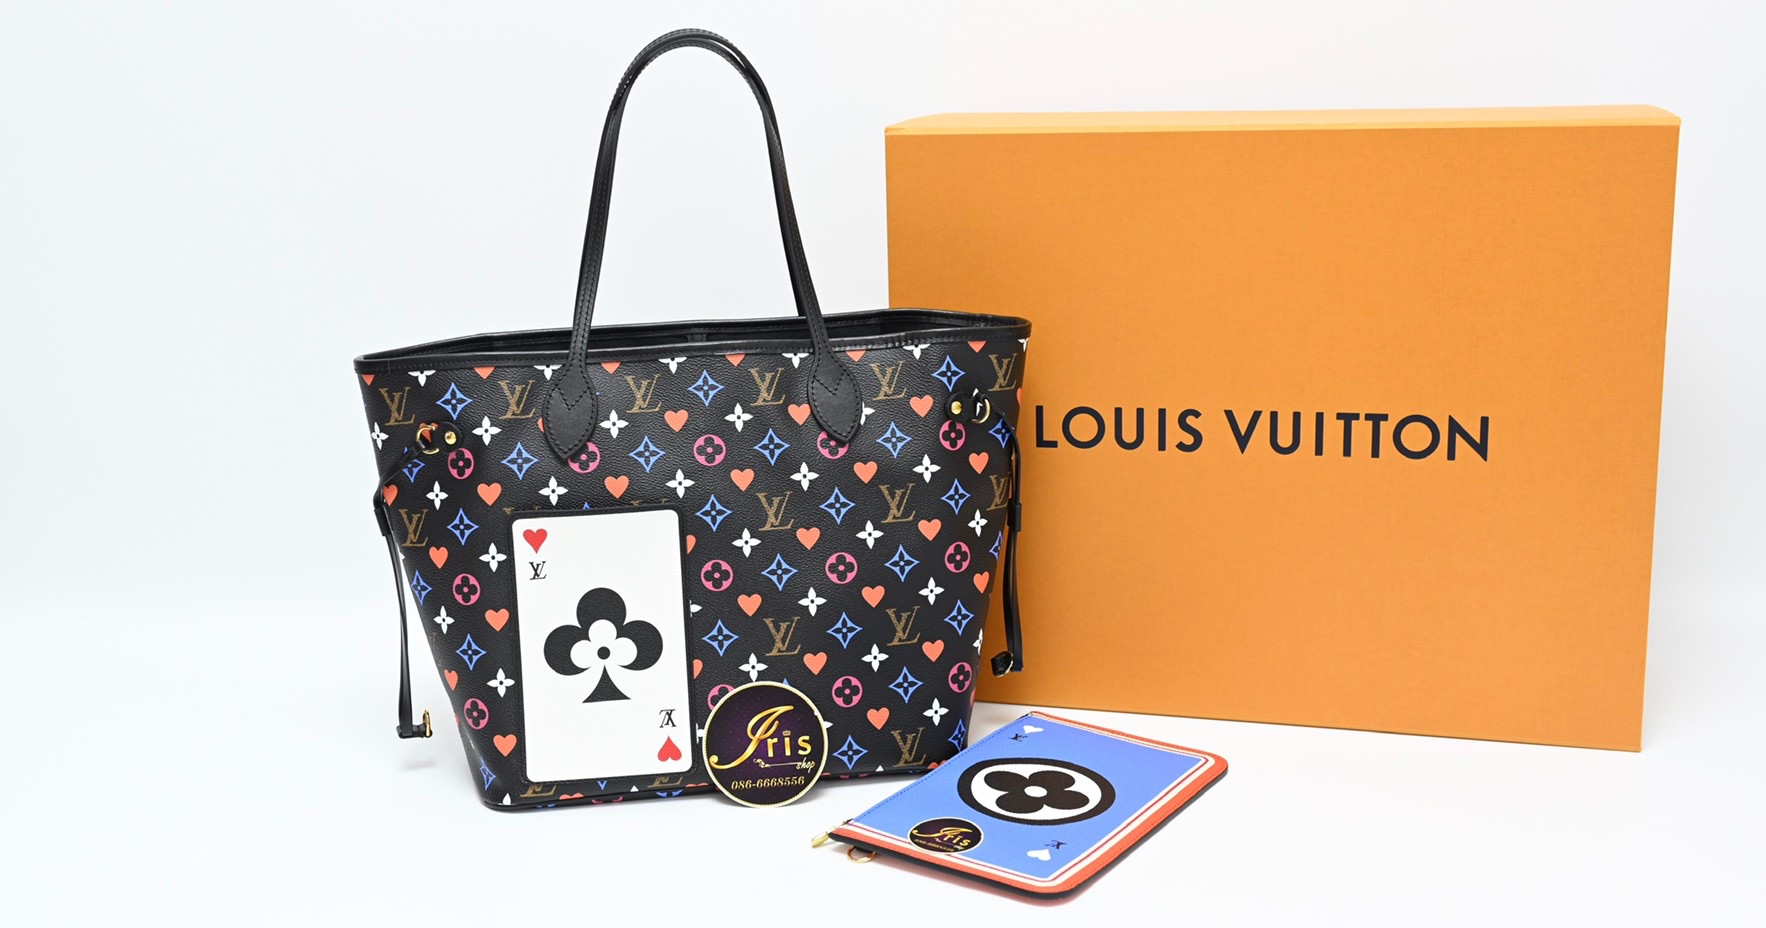 cyber, louis vuitton and lv - image #6980983 on